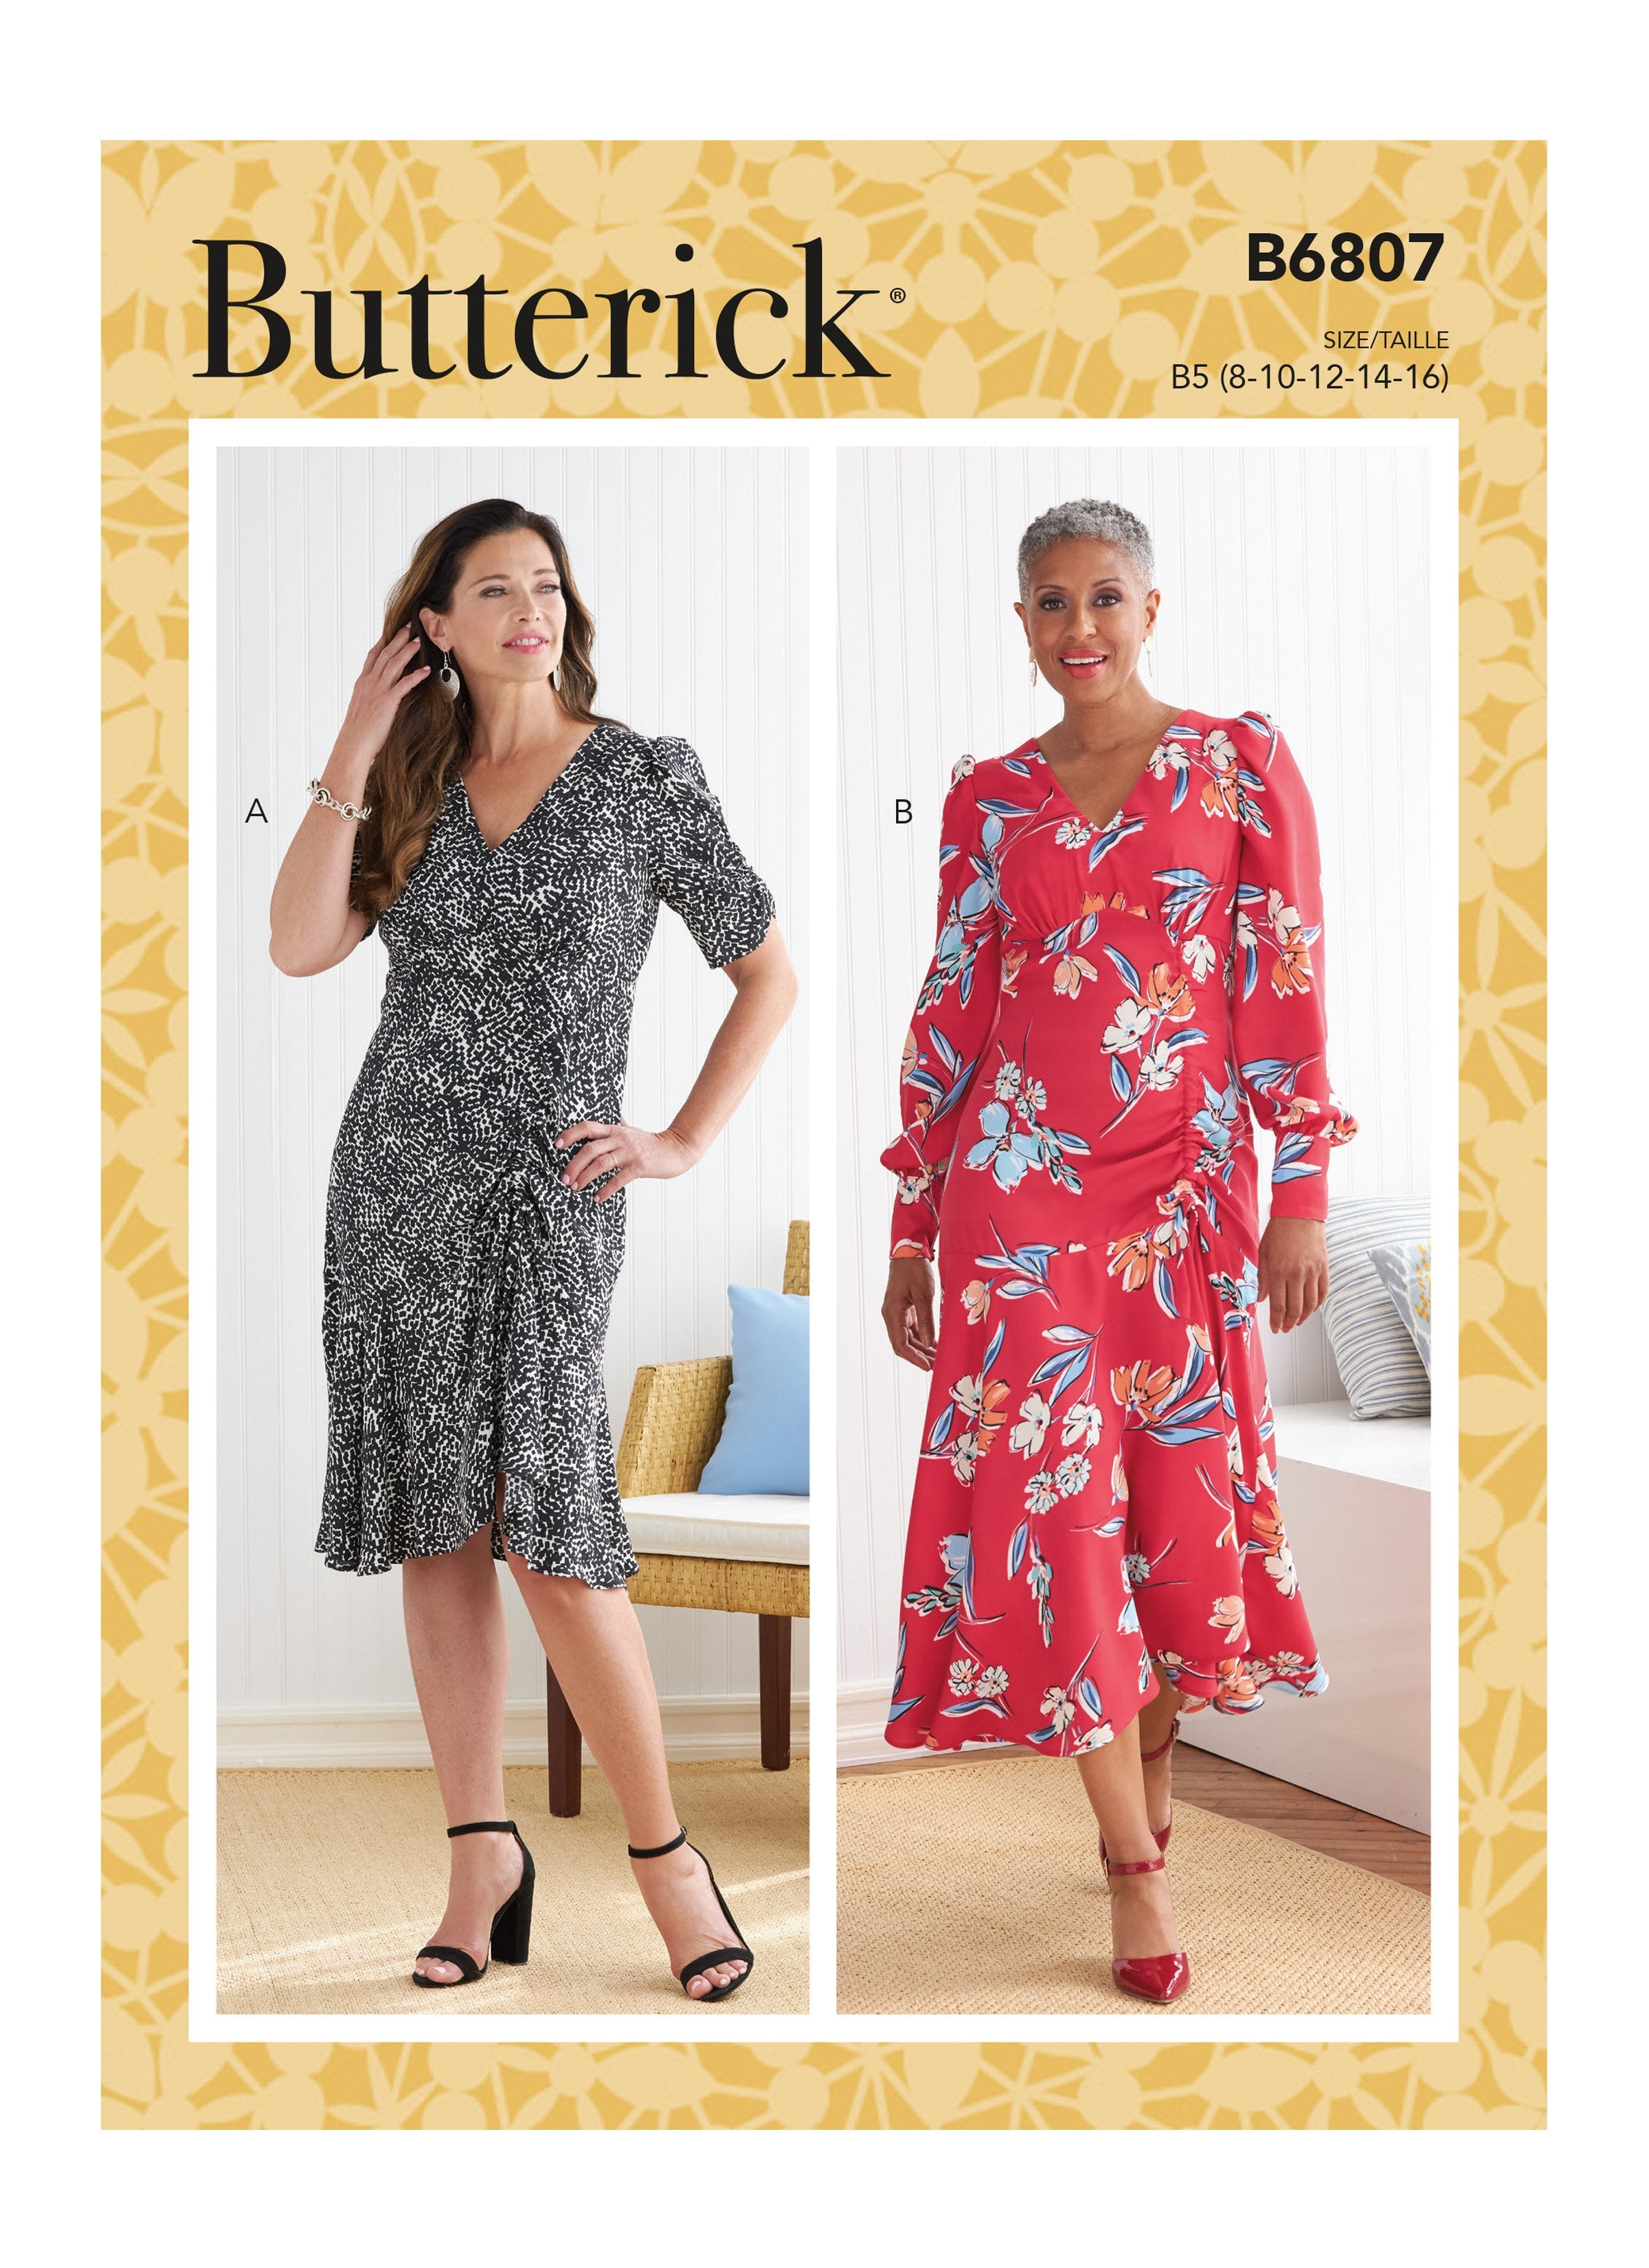 Butterick 6807 Misses Dress Pattern from Jaycotts Sewing Supplies